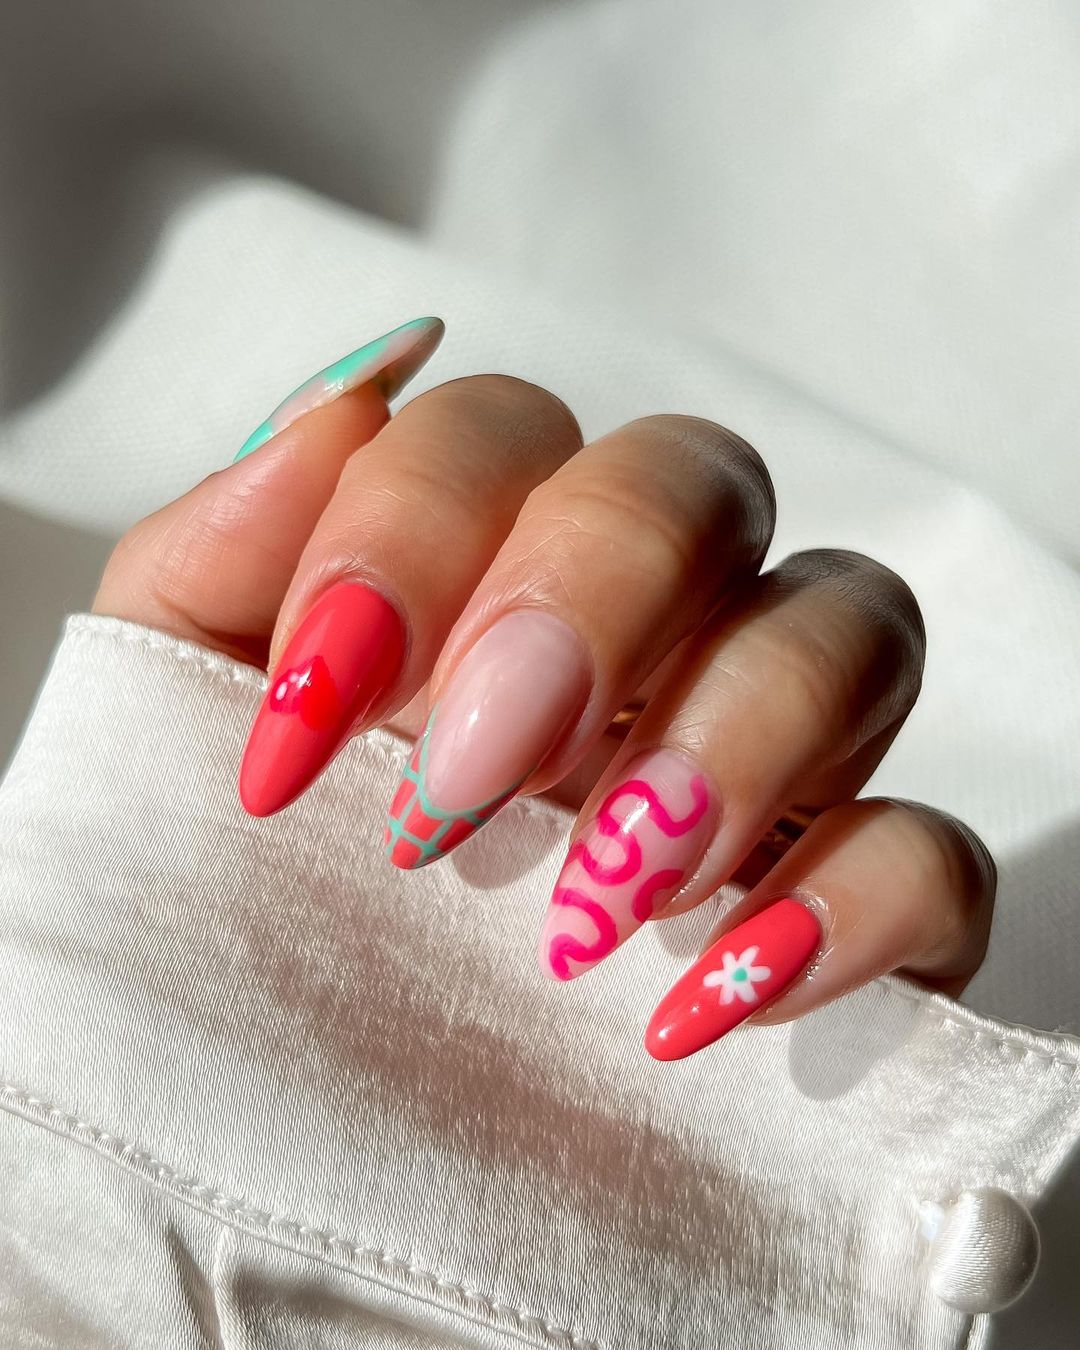 50 Best Nail Designs Trends To Try Out In 2022 images 50